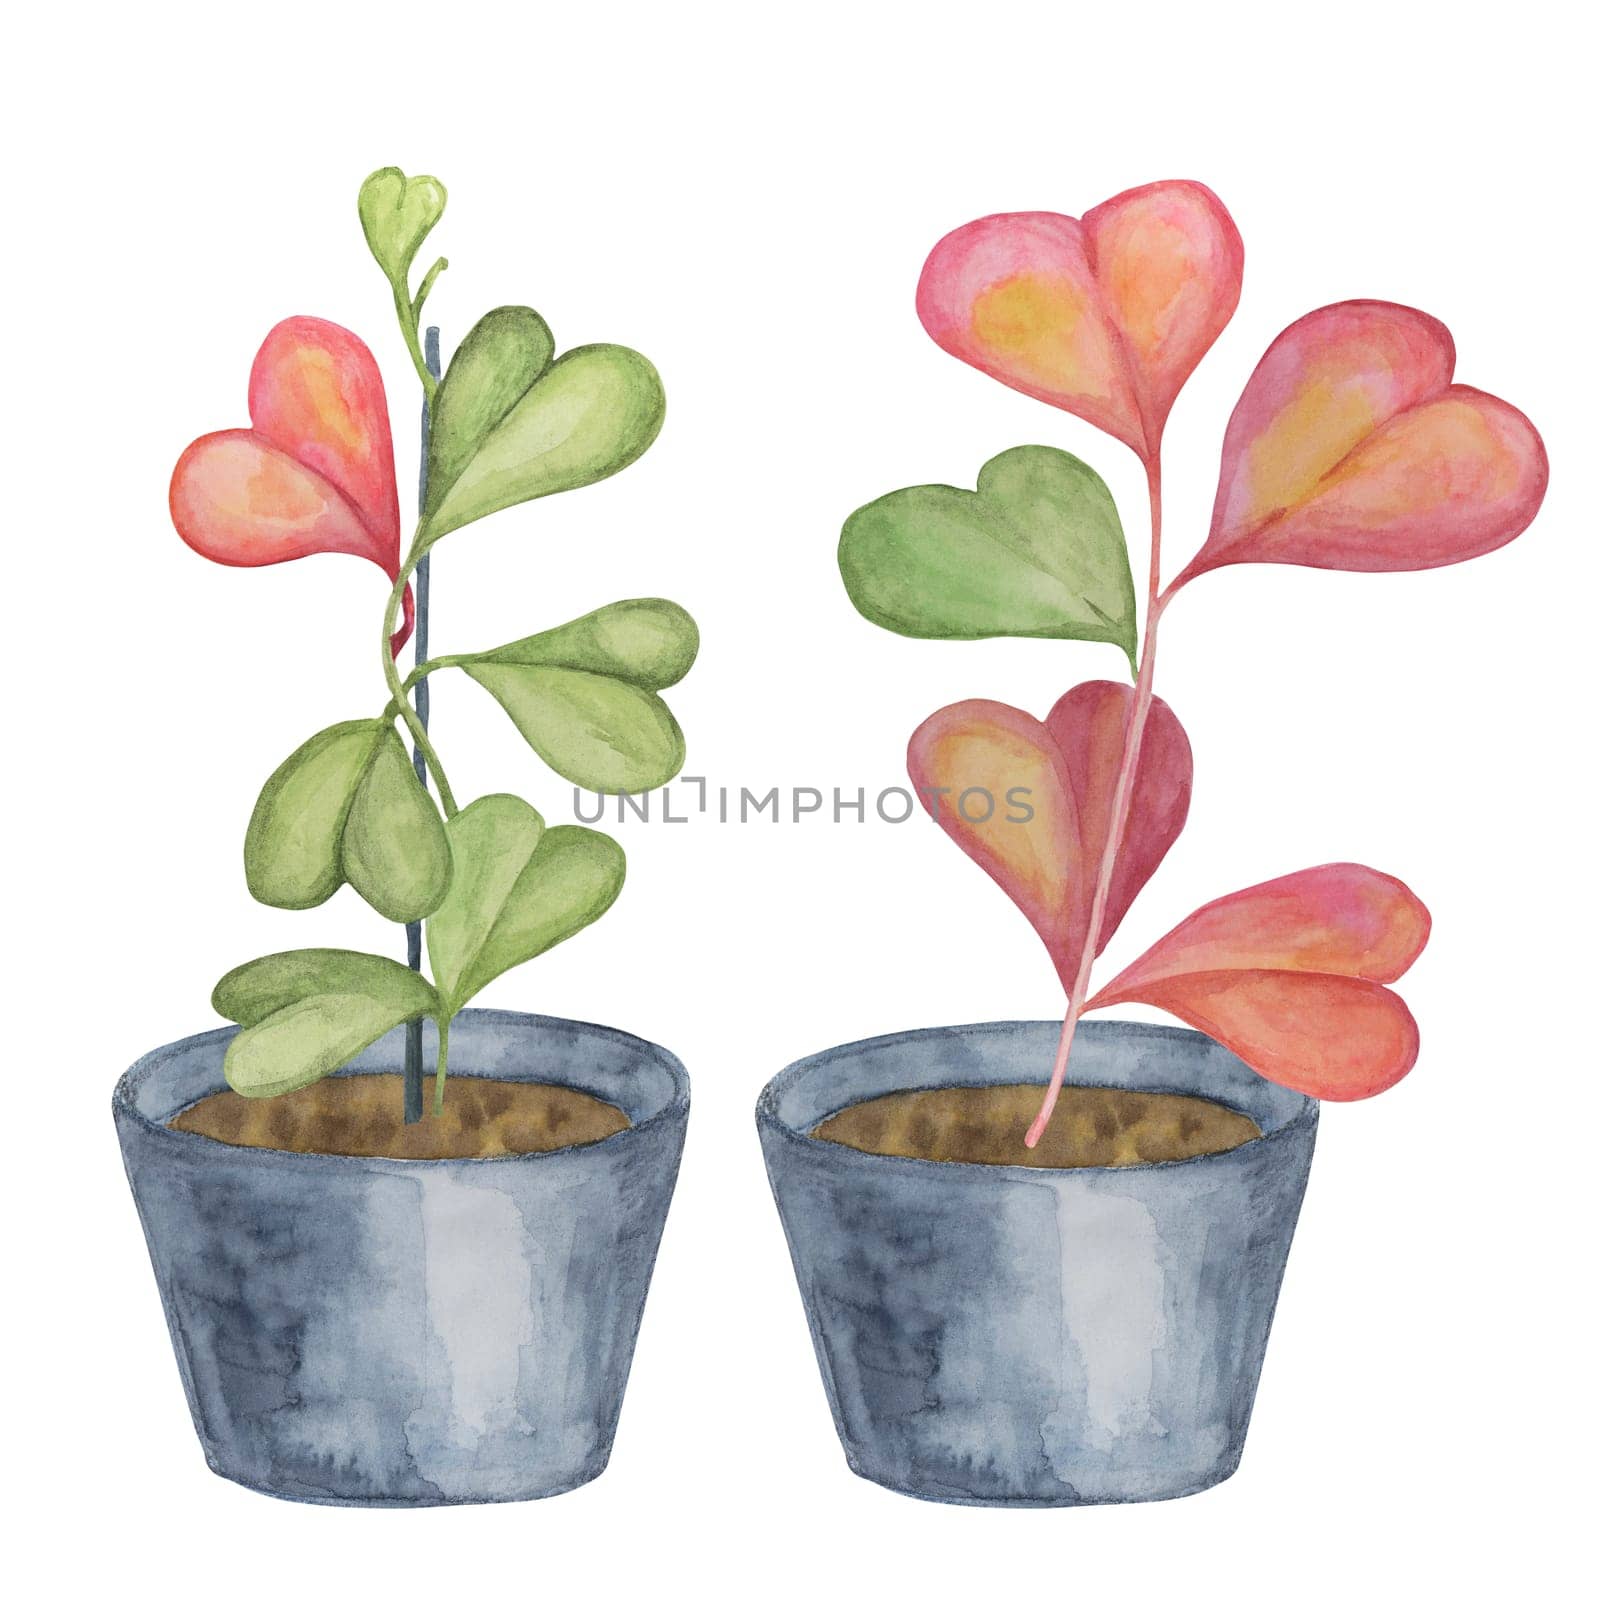 Two pots with hoya kerrii plants in watercolor by Fofito